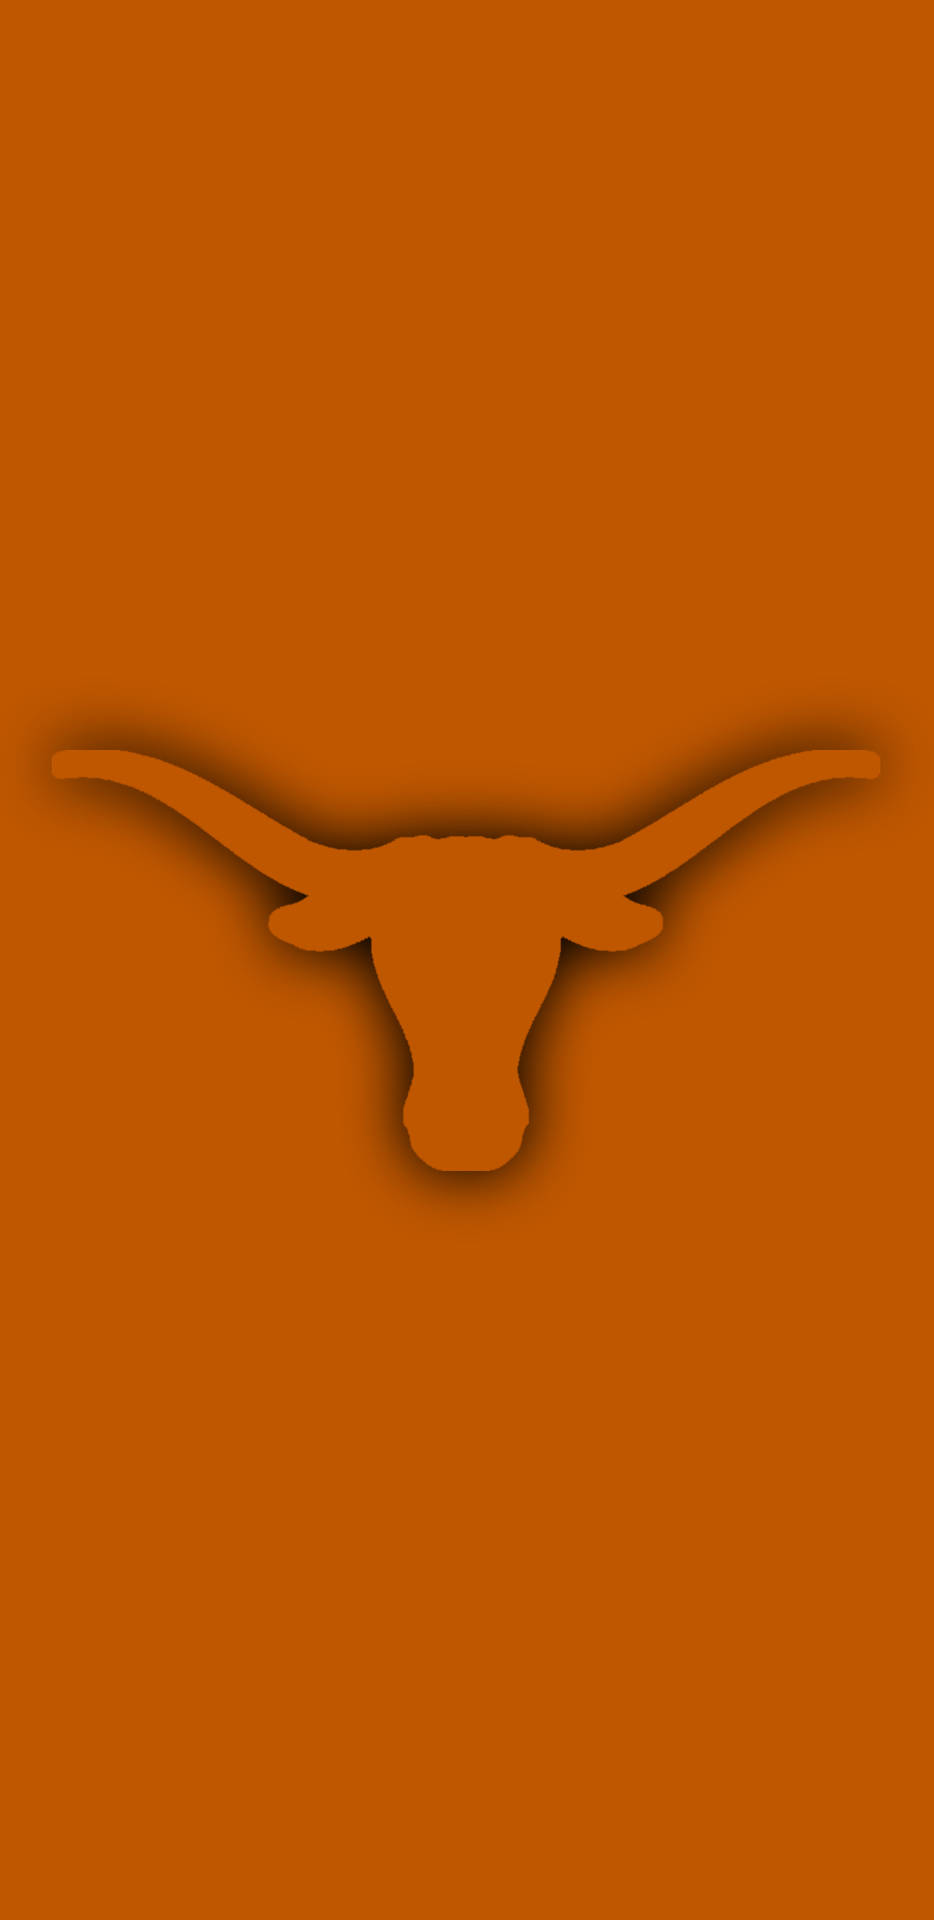 Texas Football on Twitter Wallpaper Wednesday Decorate your backgrounds  with these 2019 Texas Longhorns football schedules ThisIsTexas HookEm  httpstcocBDTqxdkj3  Twitter